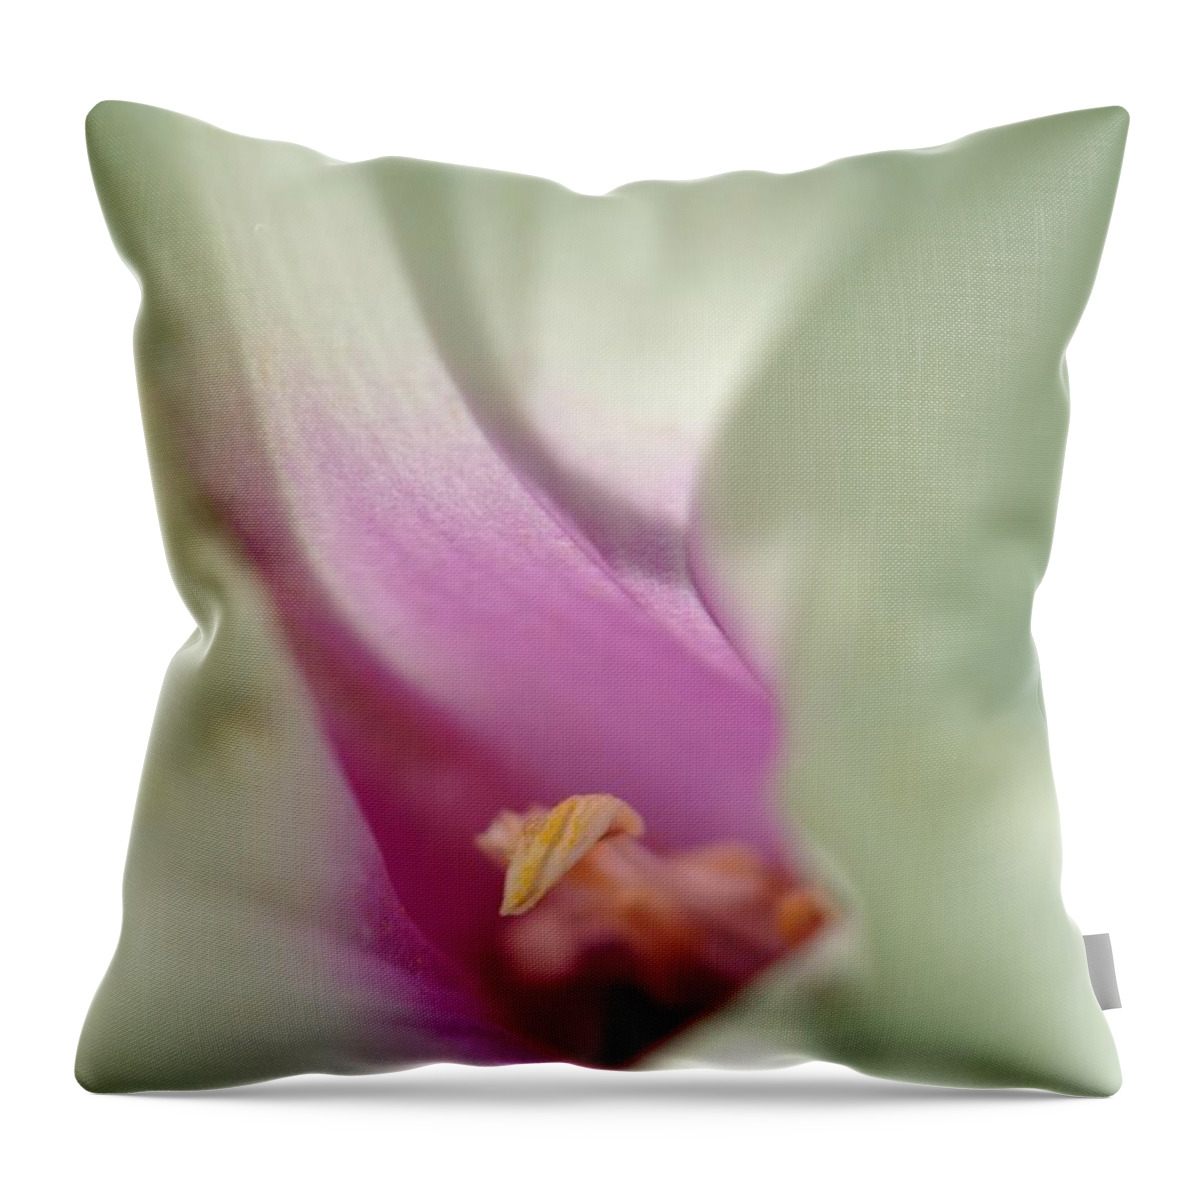 Morning Glory Throw Pillow featuring the photograph Morning Glory by Kelly Nowak